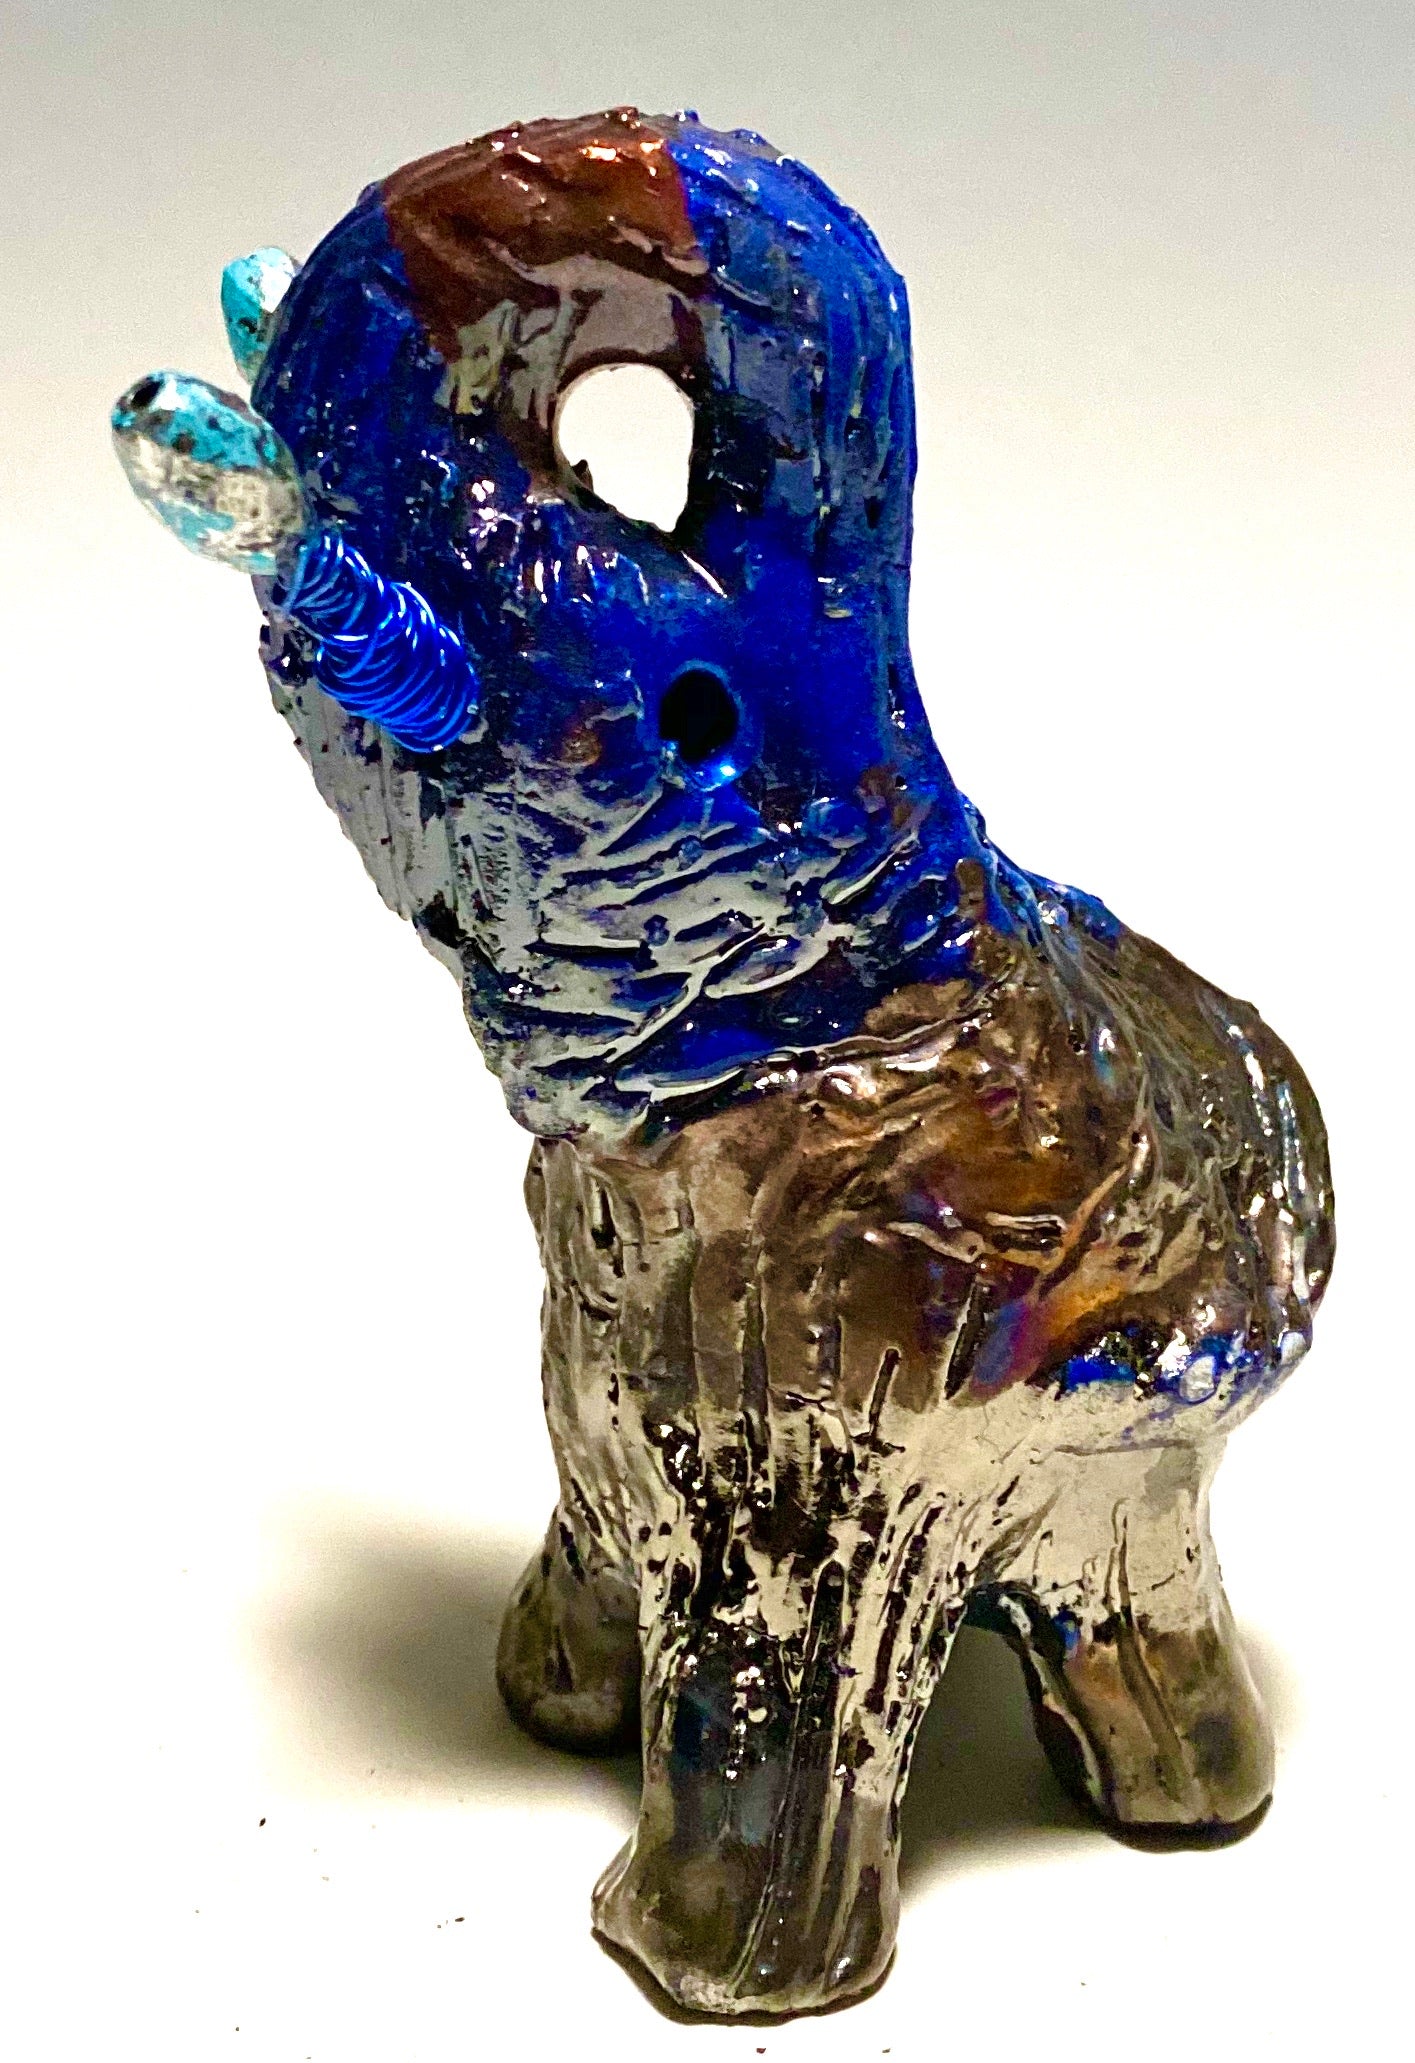 Raku Elephant Have you HERD!!!!!!  Just one of these lovely Raku Fired Elephant will make an excellent gift for your  friend, sorority or for your home’ special place centerpiece.  5" x 4" x 4" 9 ozs. Blue wire beaded blue tusk Beautiful metallic raku colors For decorative purposely only.